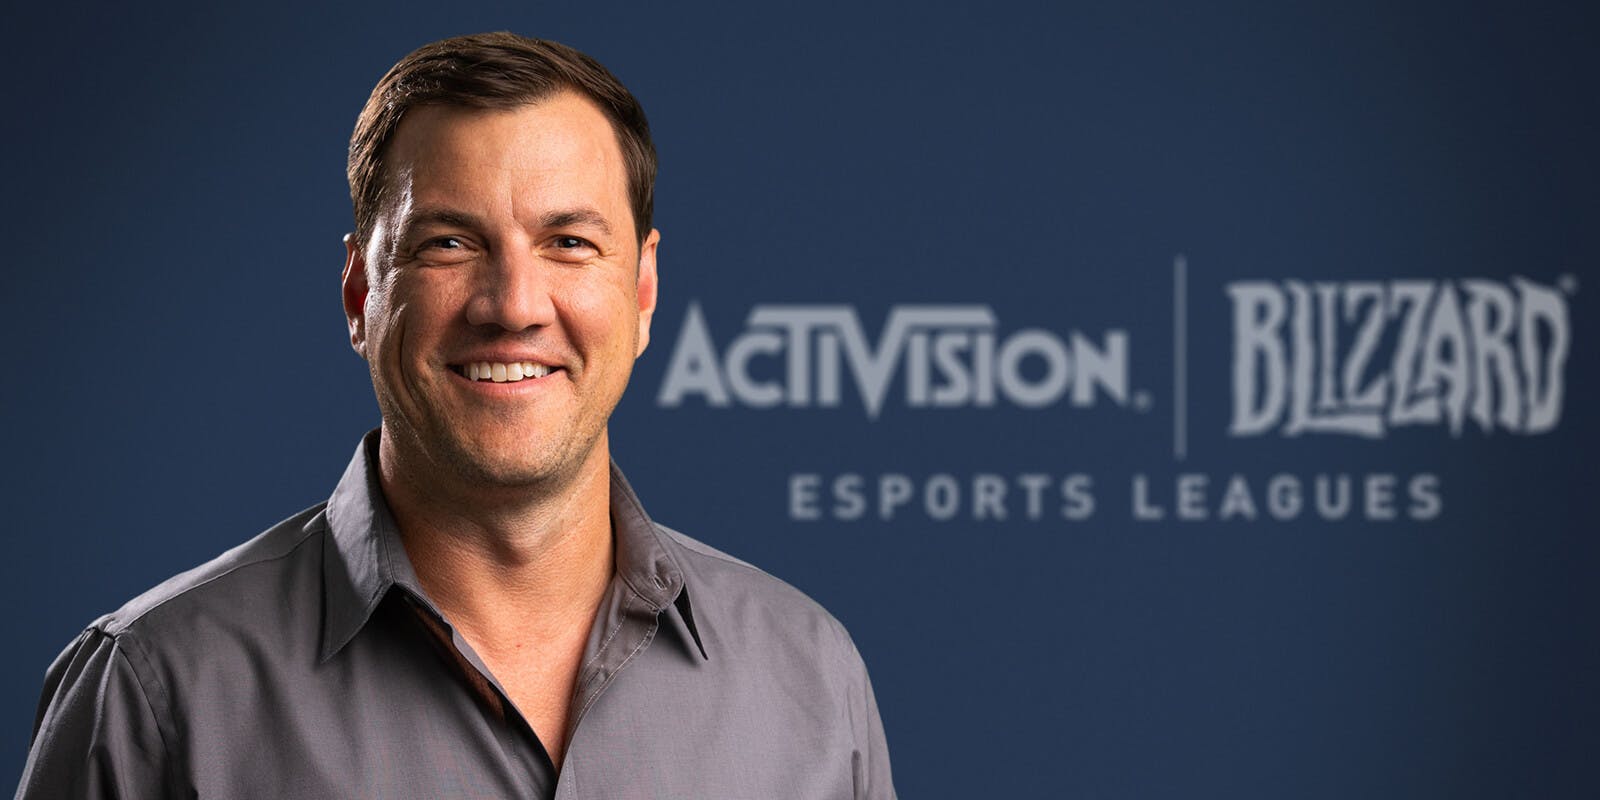 Brandon Snow, Head of Activision Blizzard Esports, is leaving the company